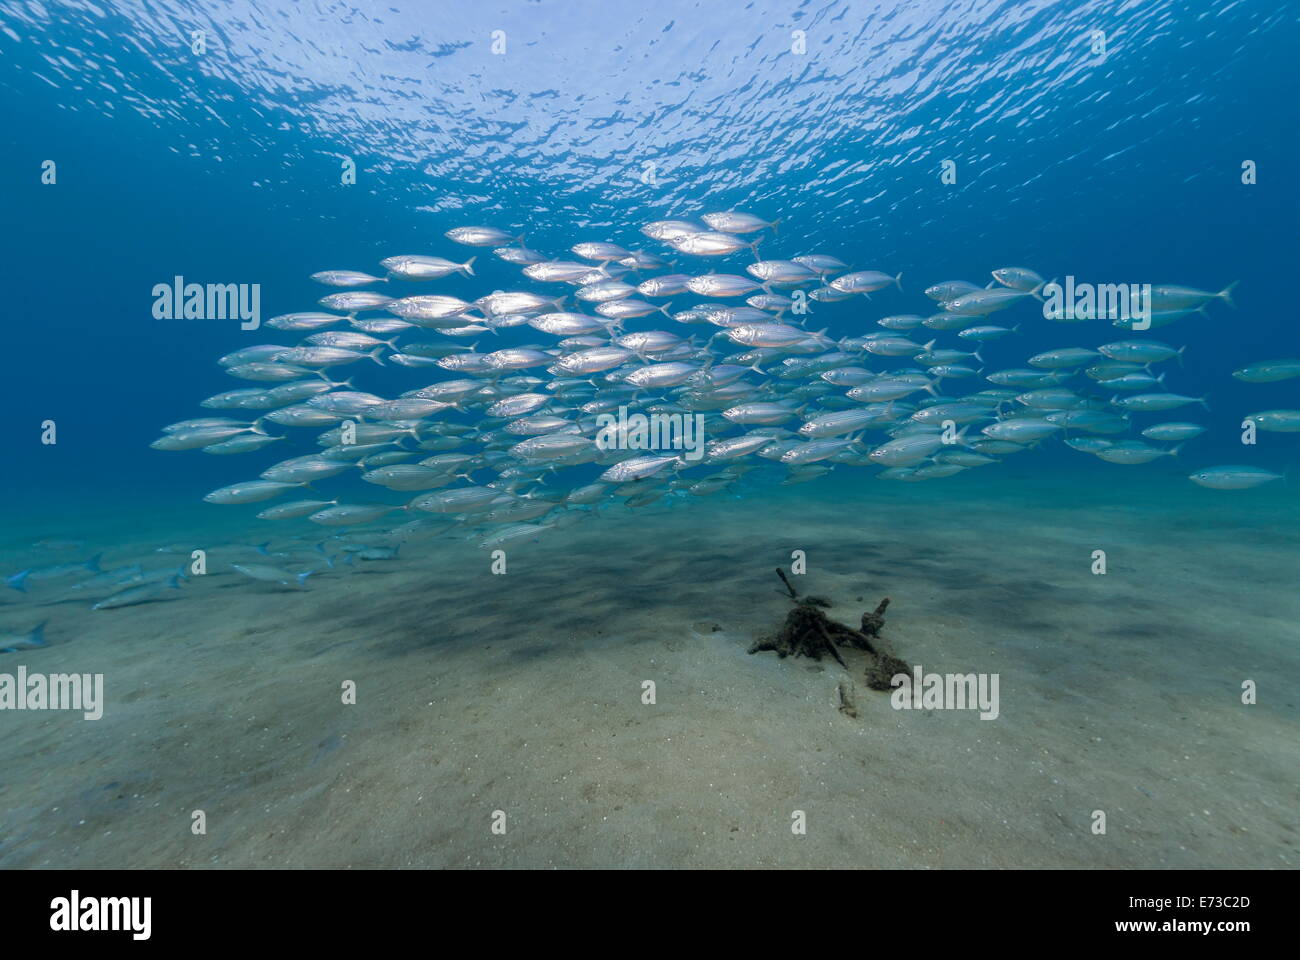 Small school of Indian mackerel in shallow water, Naama Bay, Sharm El Sheikh, Red Sea, Egypt, North Africa Stock Photo